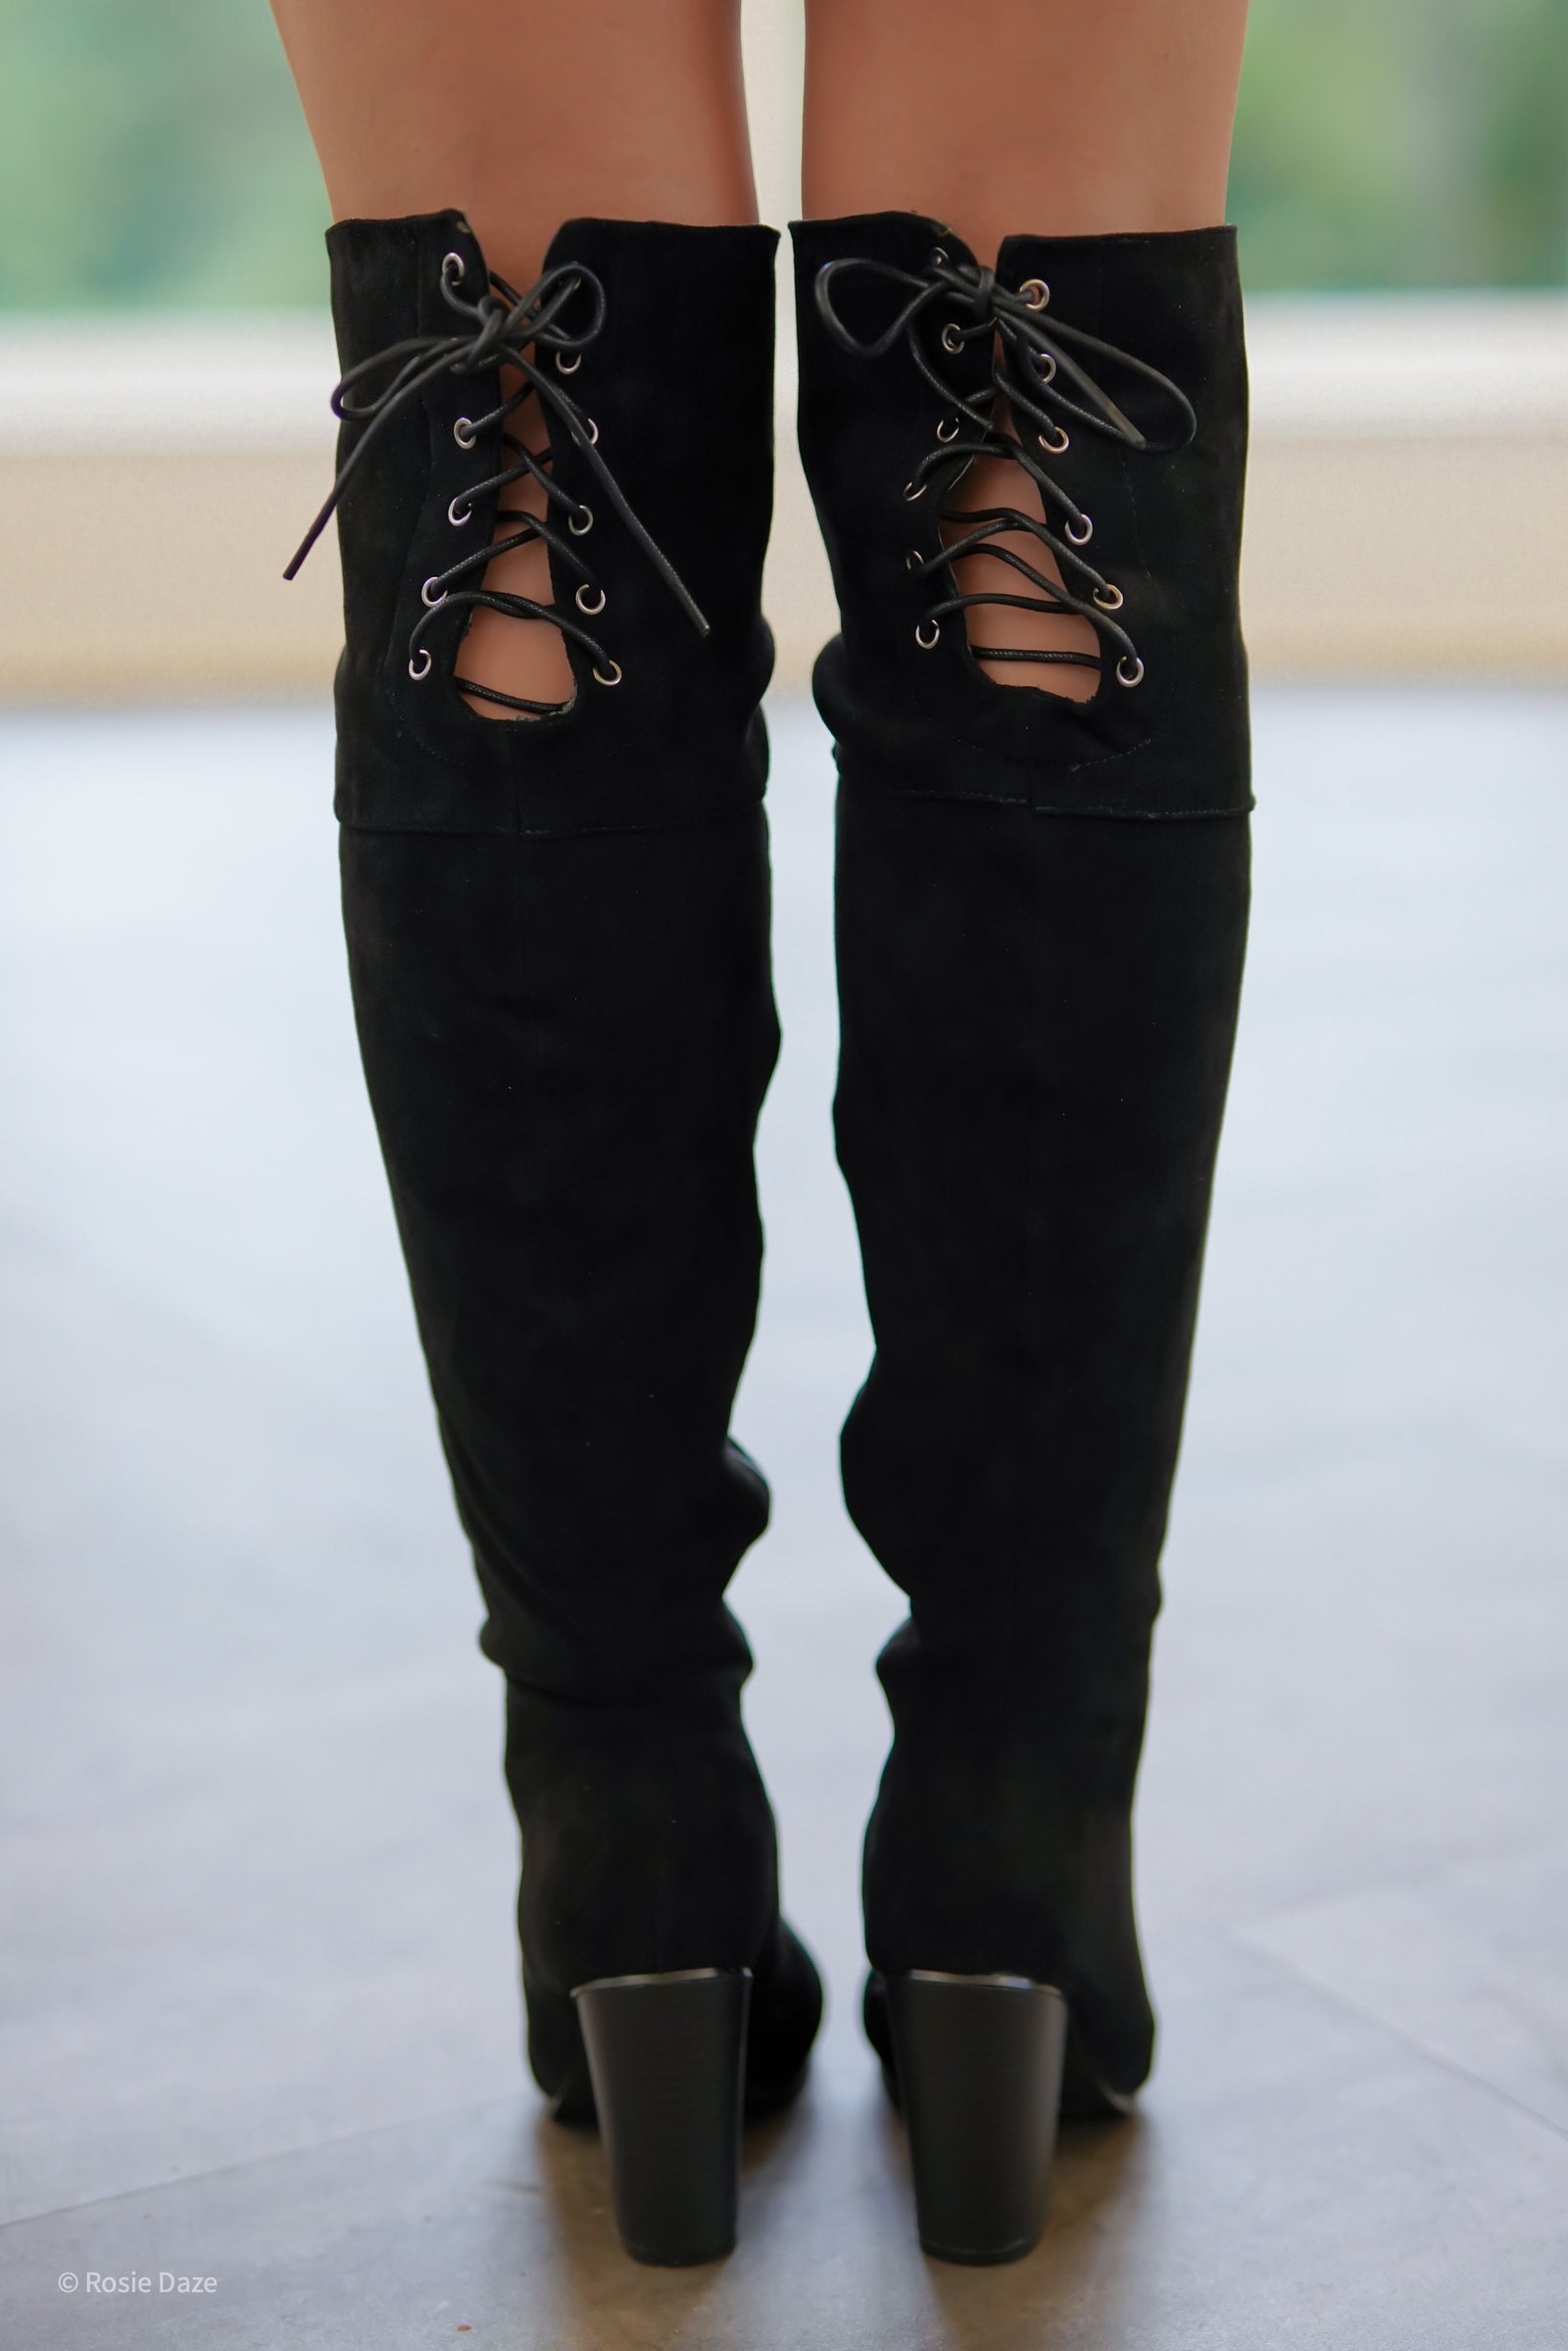 thigh highs shoes